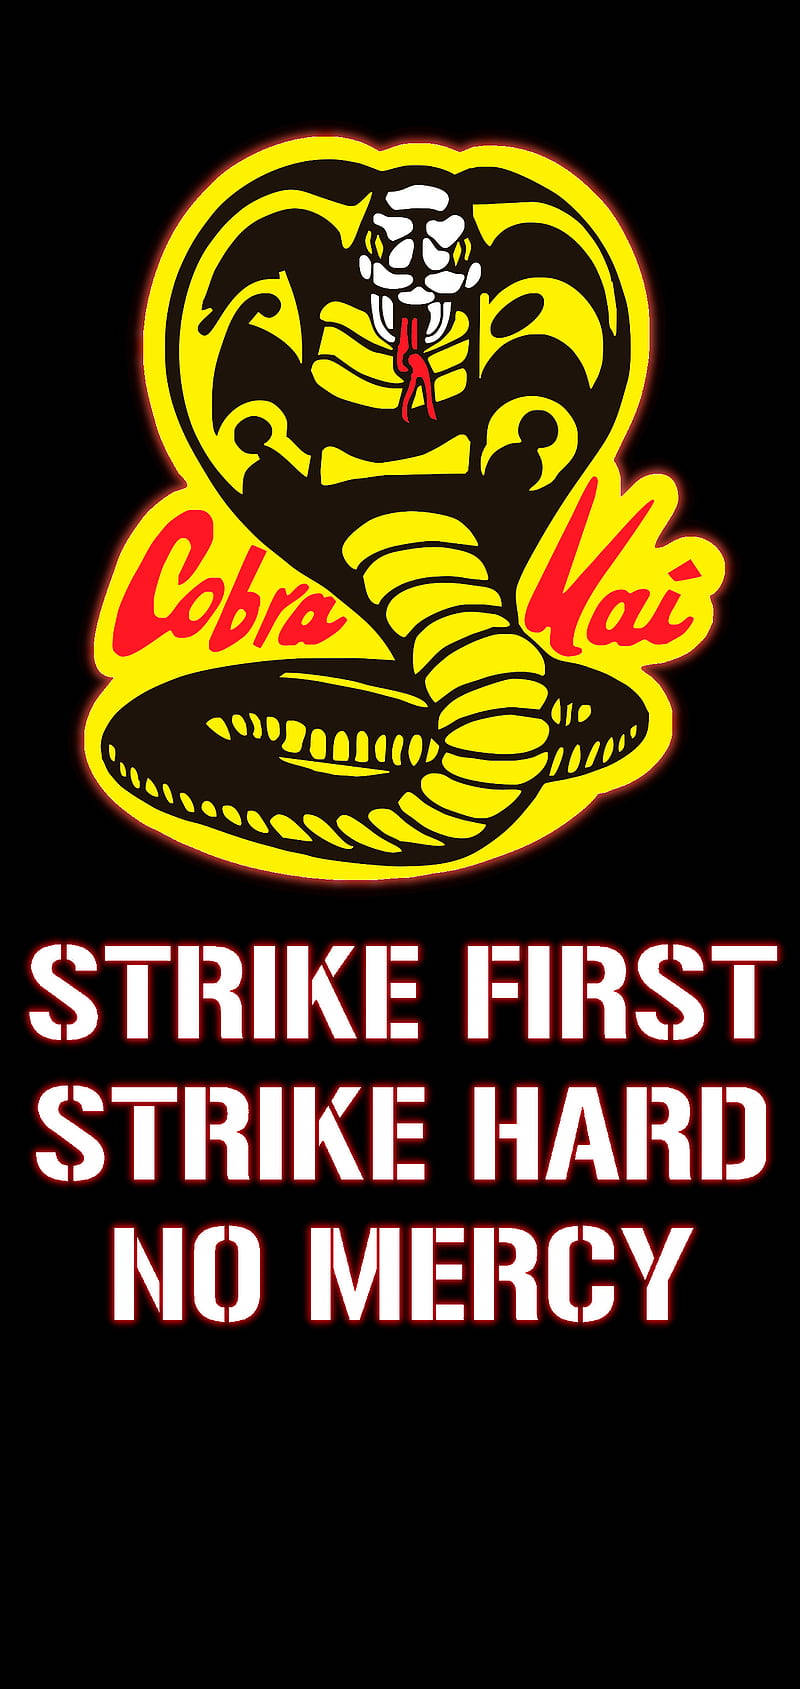 Get The Ultimate Martial Arts Experience With Cobra